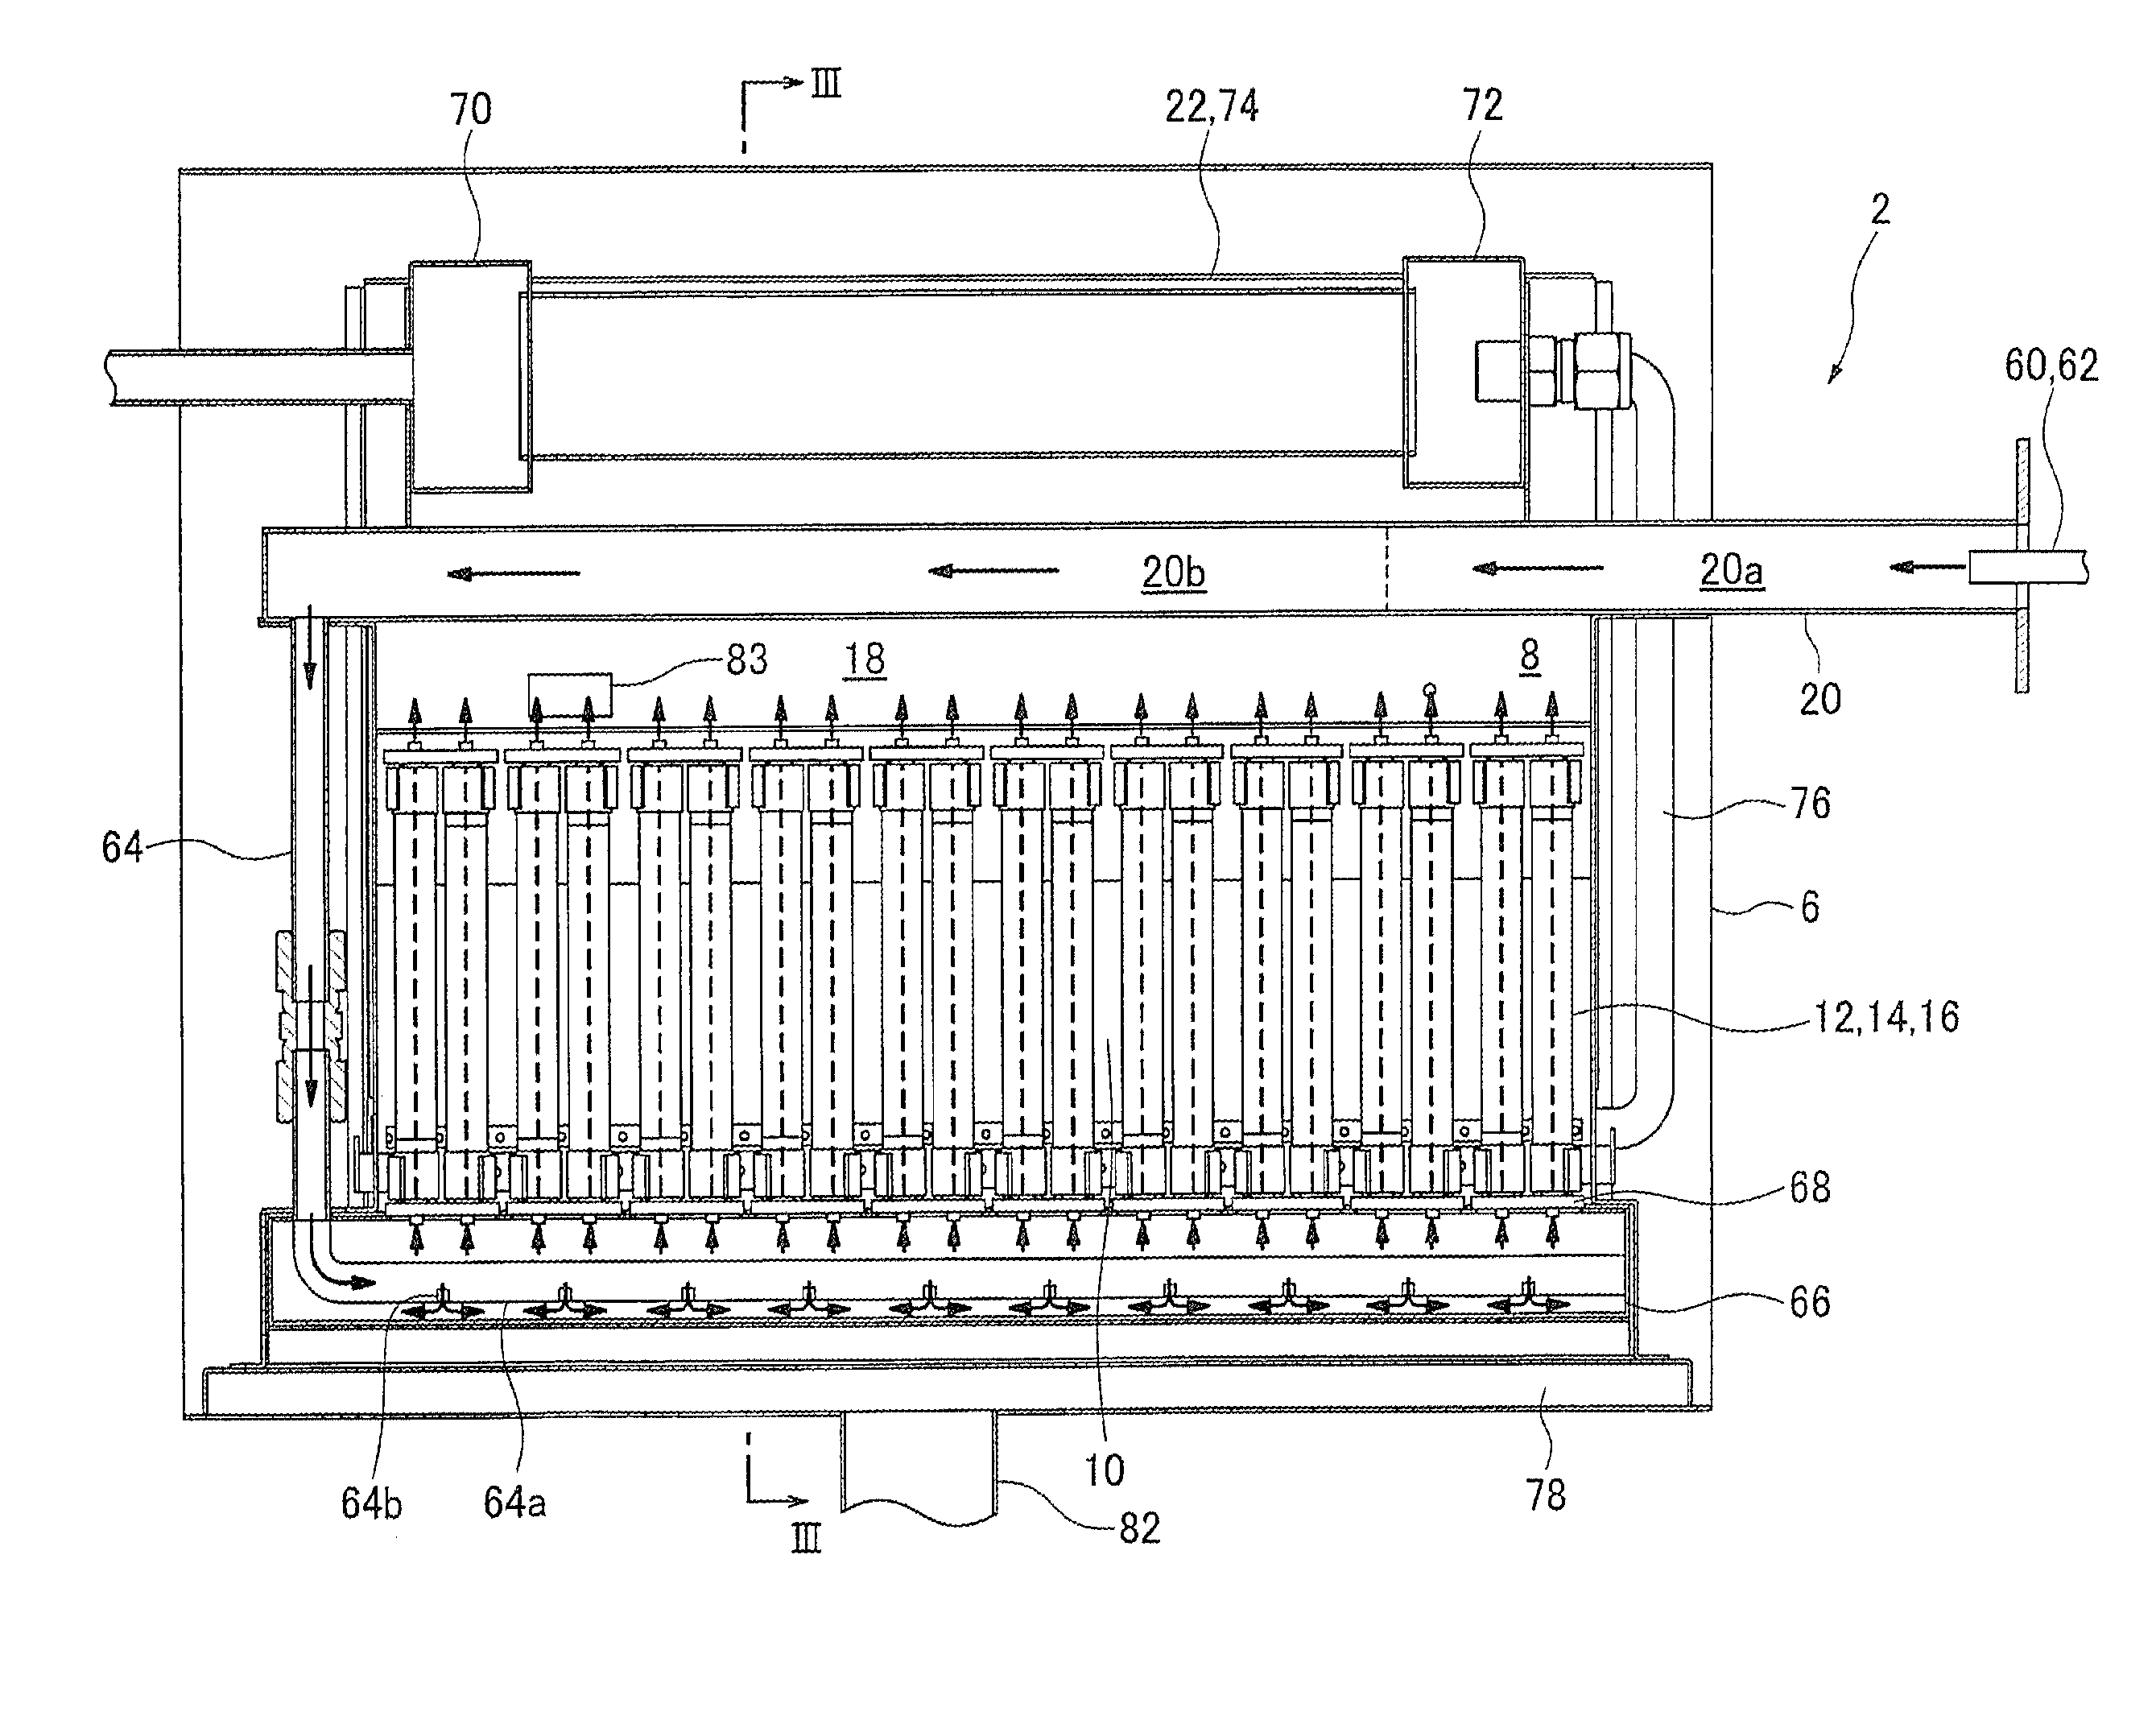 Method for Producing Cerium-Based Composite Oxide, Solid Oxide Fuel Cell, and Fuel Cell System